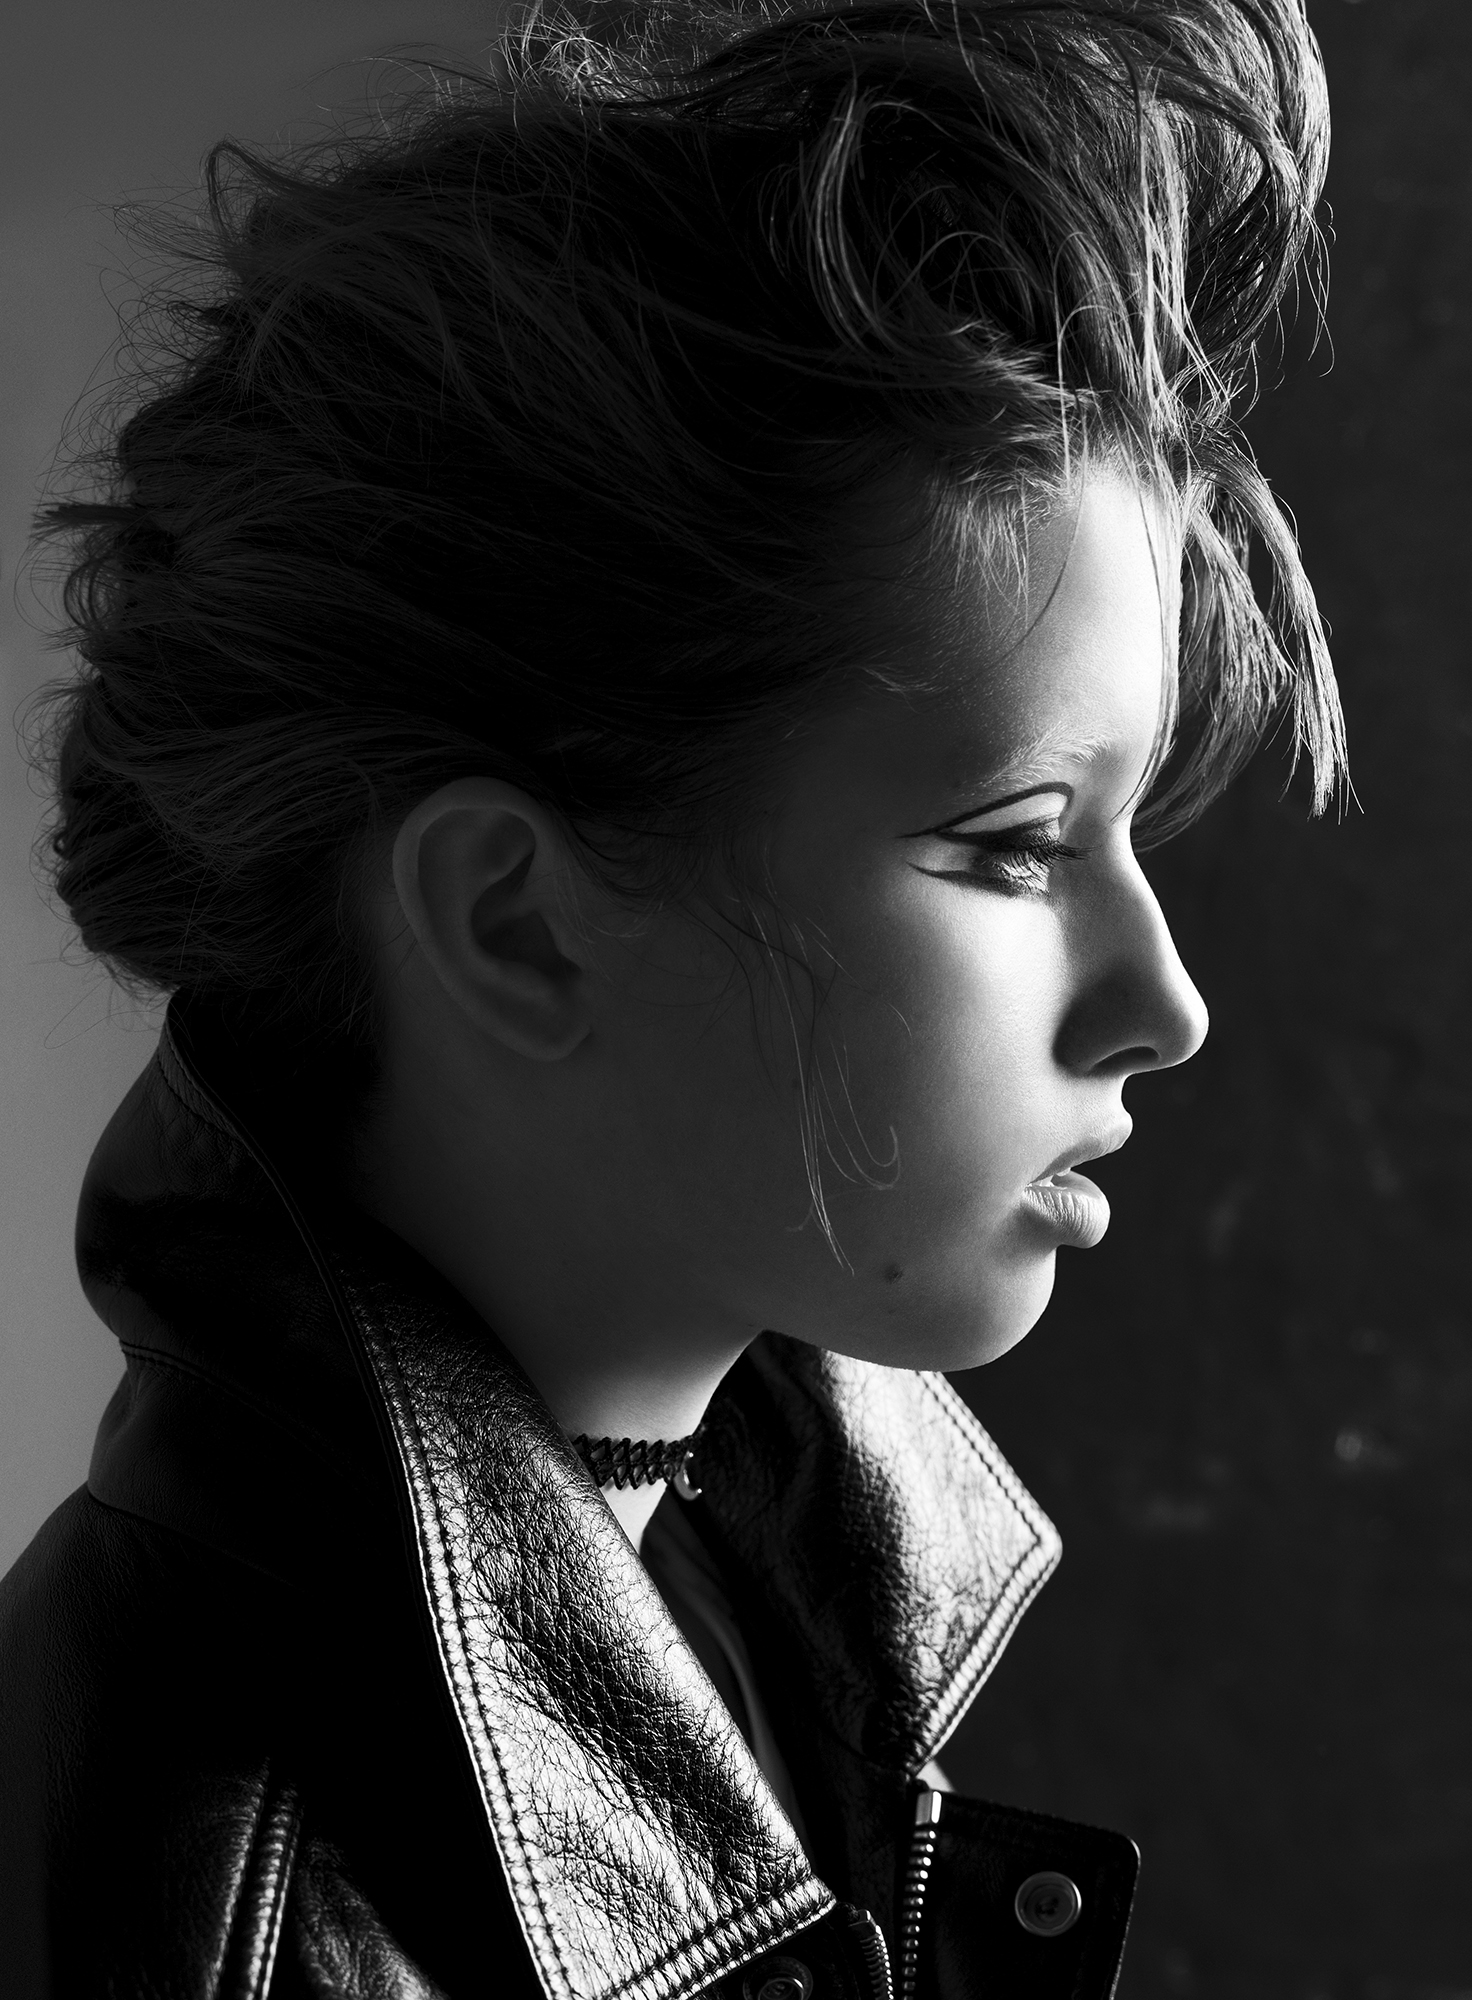  Jacket <strong>CELINE by Hedi Slimane</strong> / Necklace Ever’s own